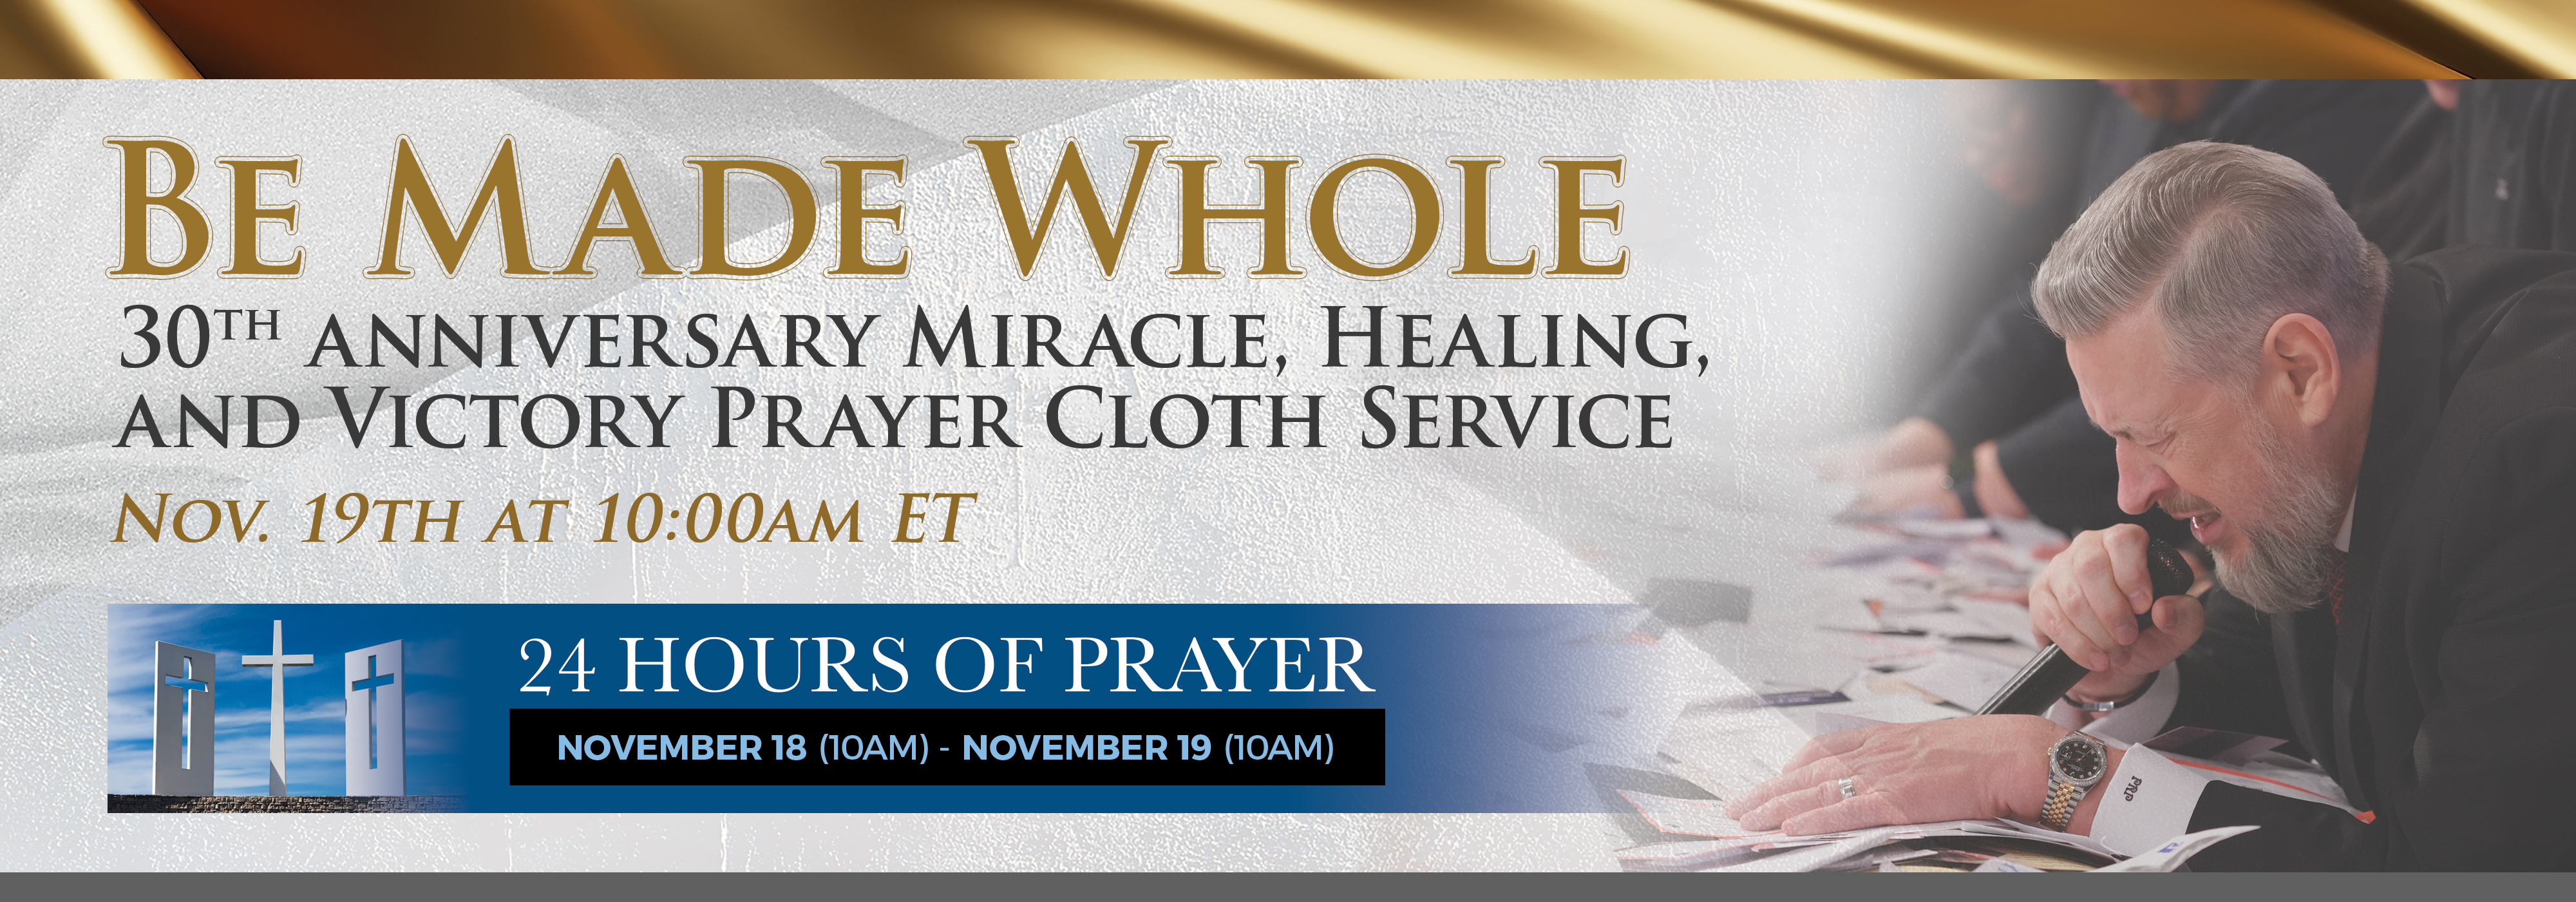 Receive the Anointing to Be Made Whole 30th Miracle, Healing and Victory Prayer Cloth Service | November 19th at 10am ET